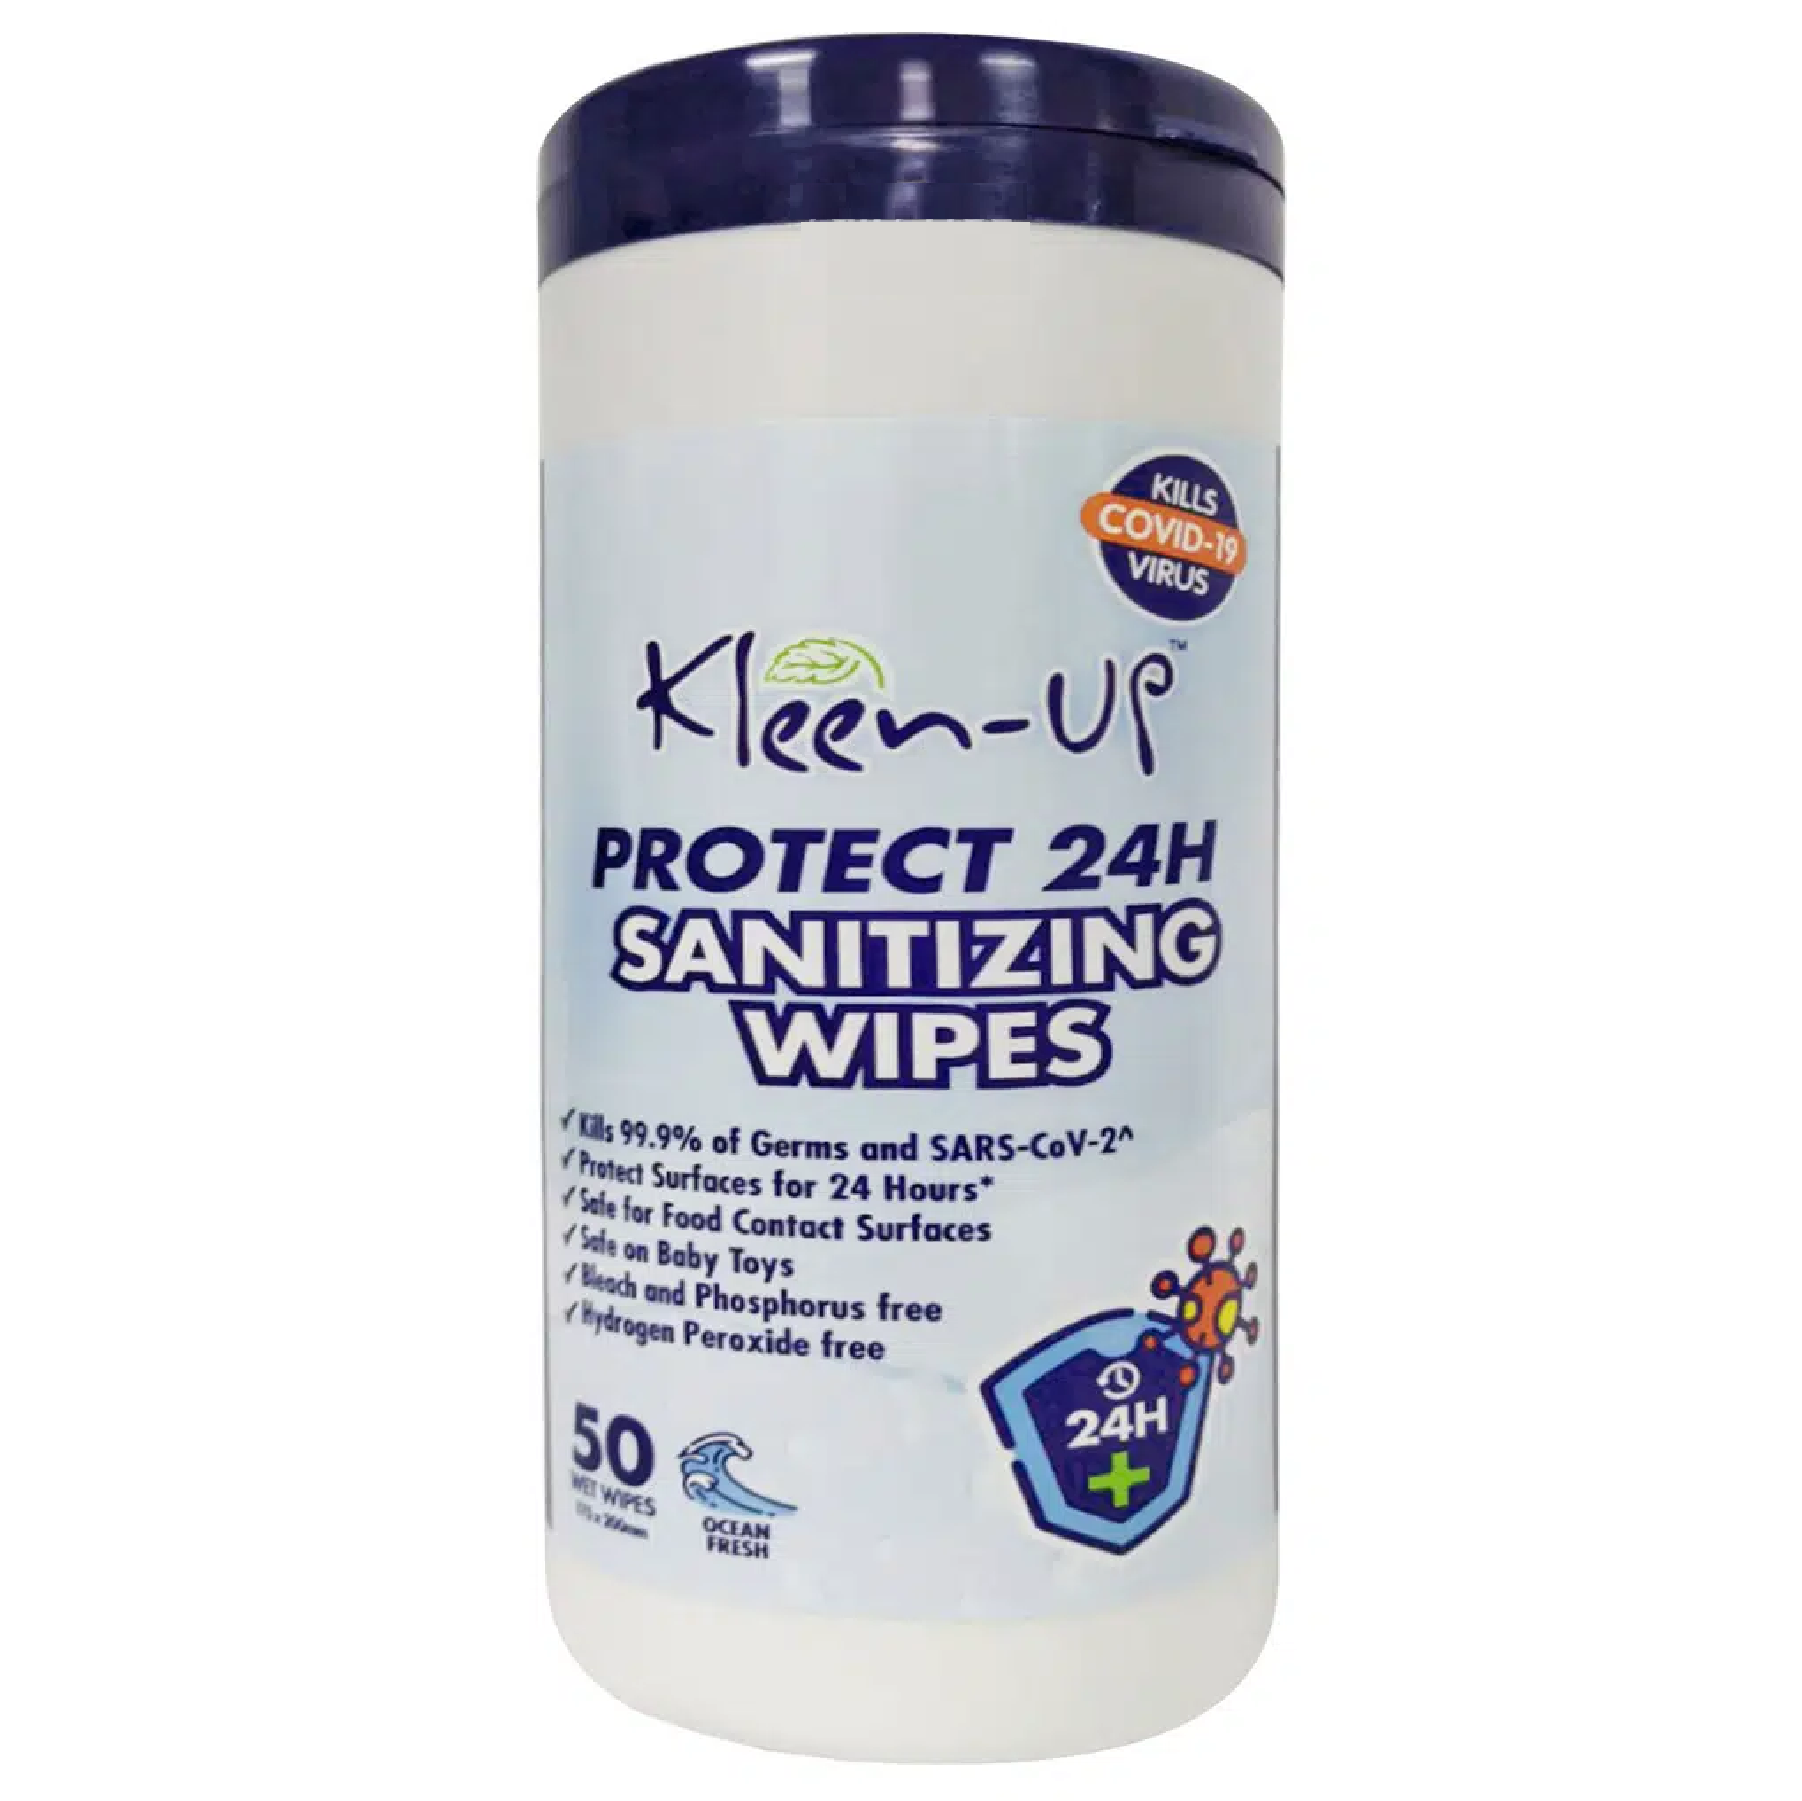 KLEEN-UP PROTECT 24H Sanitizing Wipes 50 SHEETS/TUB